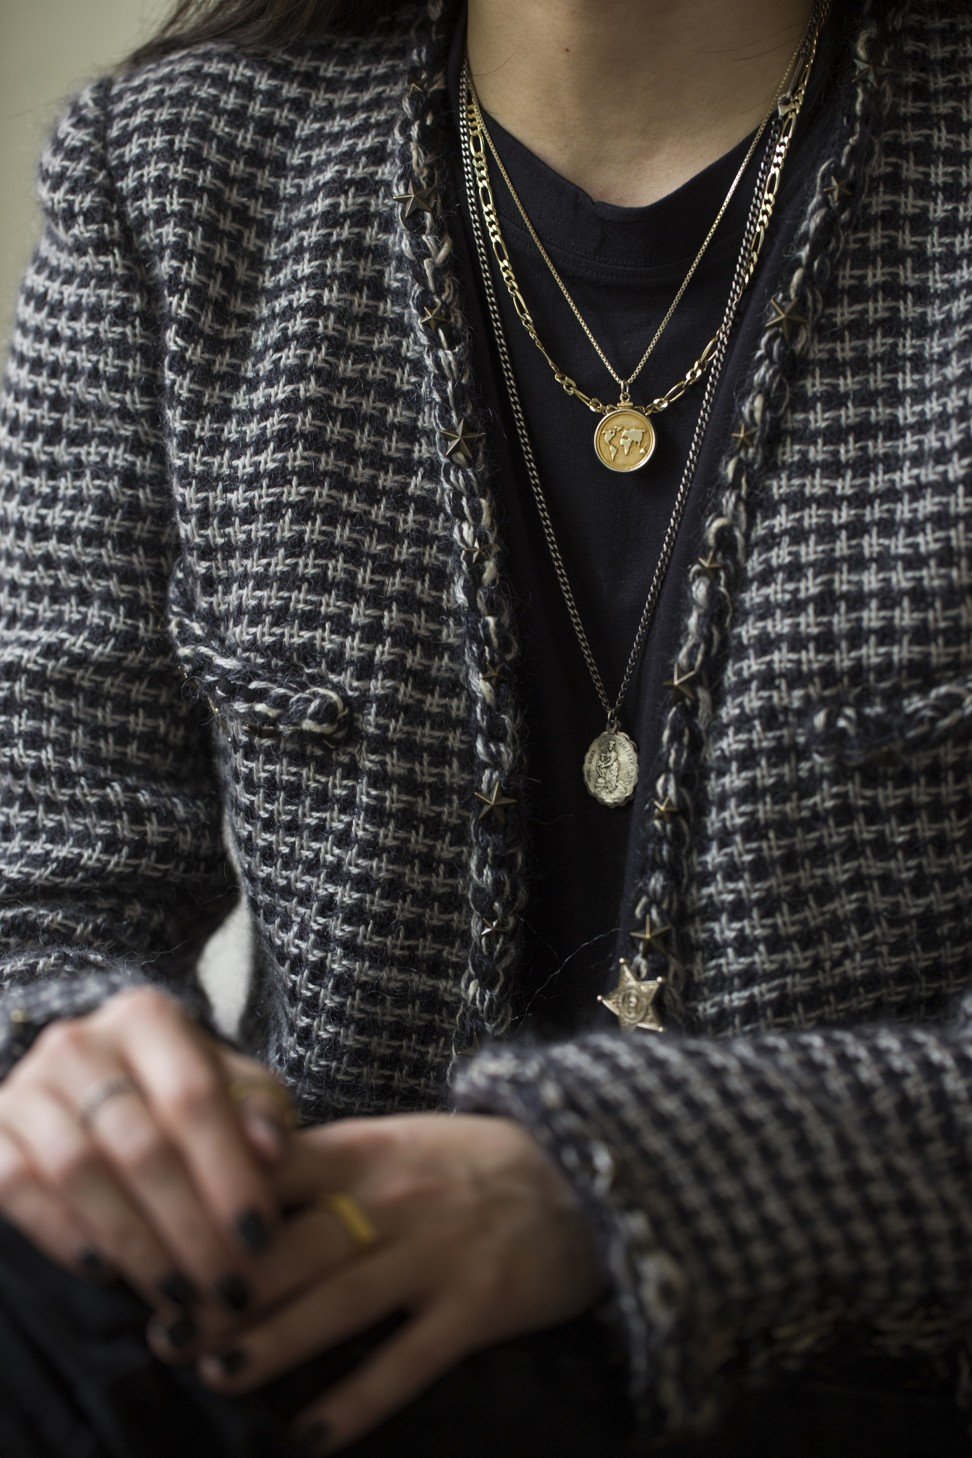 Jacket by Chanel, T-shirt by ReDone, necklaces by Cinco and Miansai. Photo: Michelle Wong